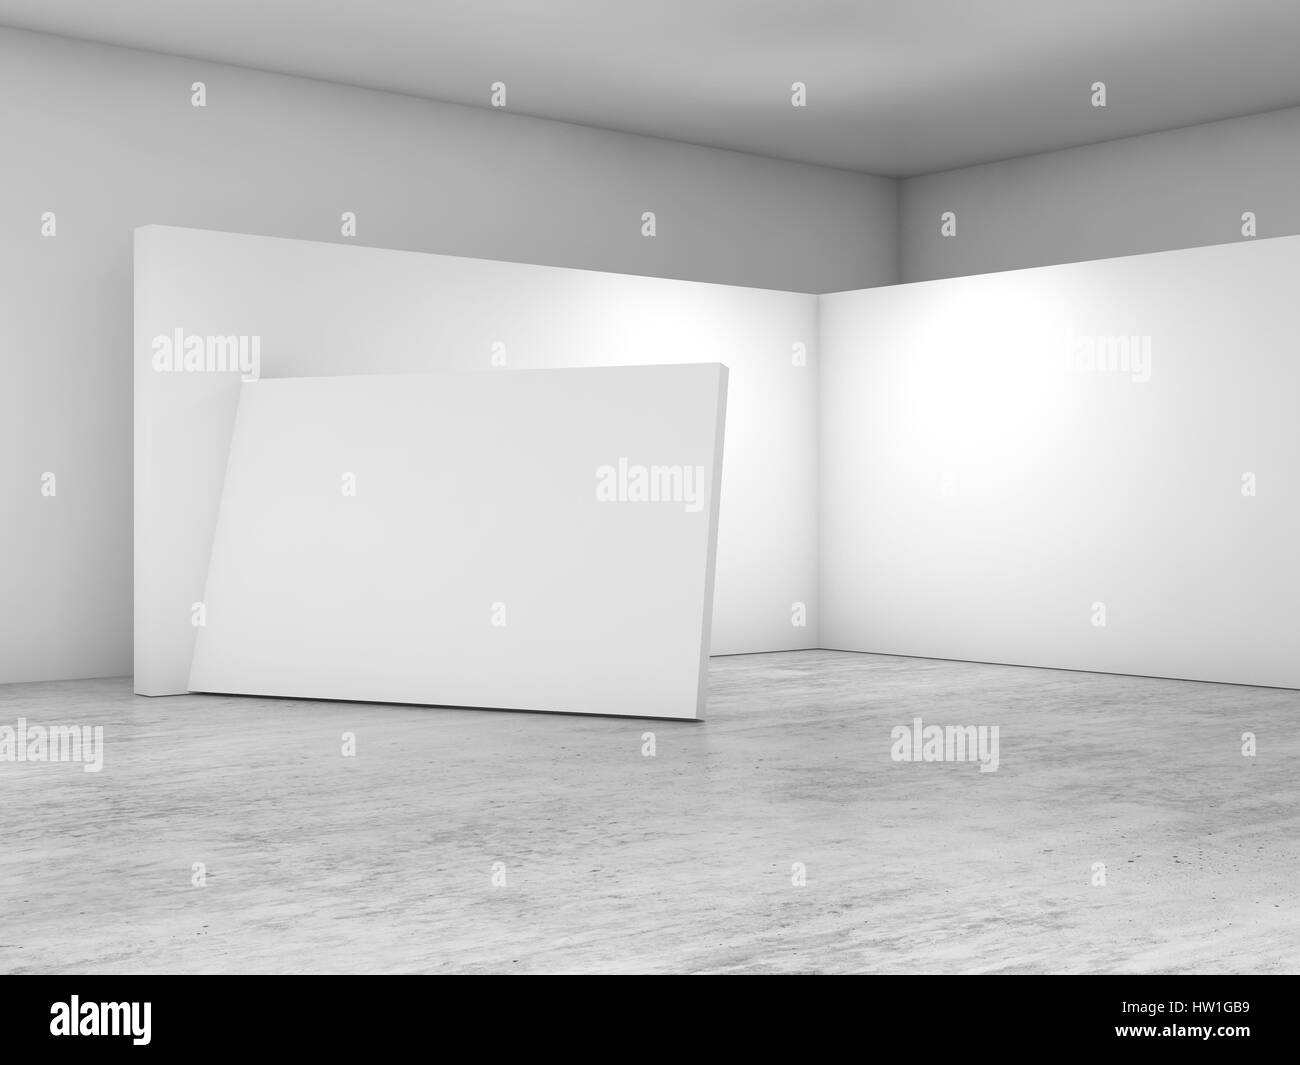 Abstract empty interior, white walls on concrete floor, contemporary architecture design. 3d render illustration Stock Photo